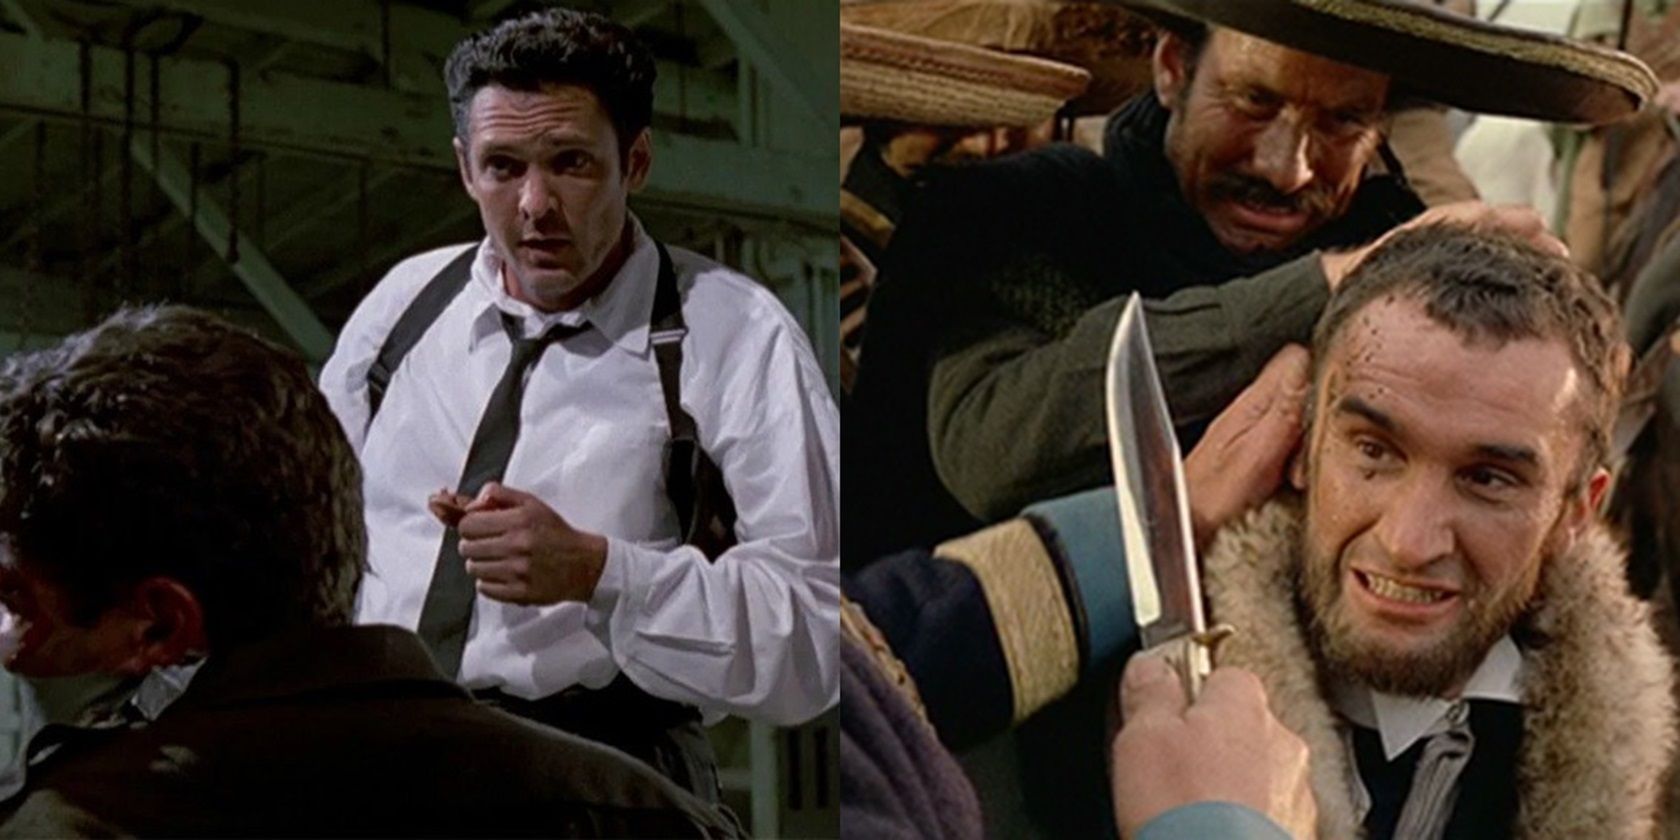 The torture scenes from Reservoir Dogs and Django